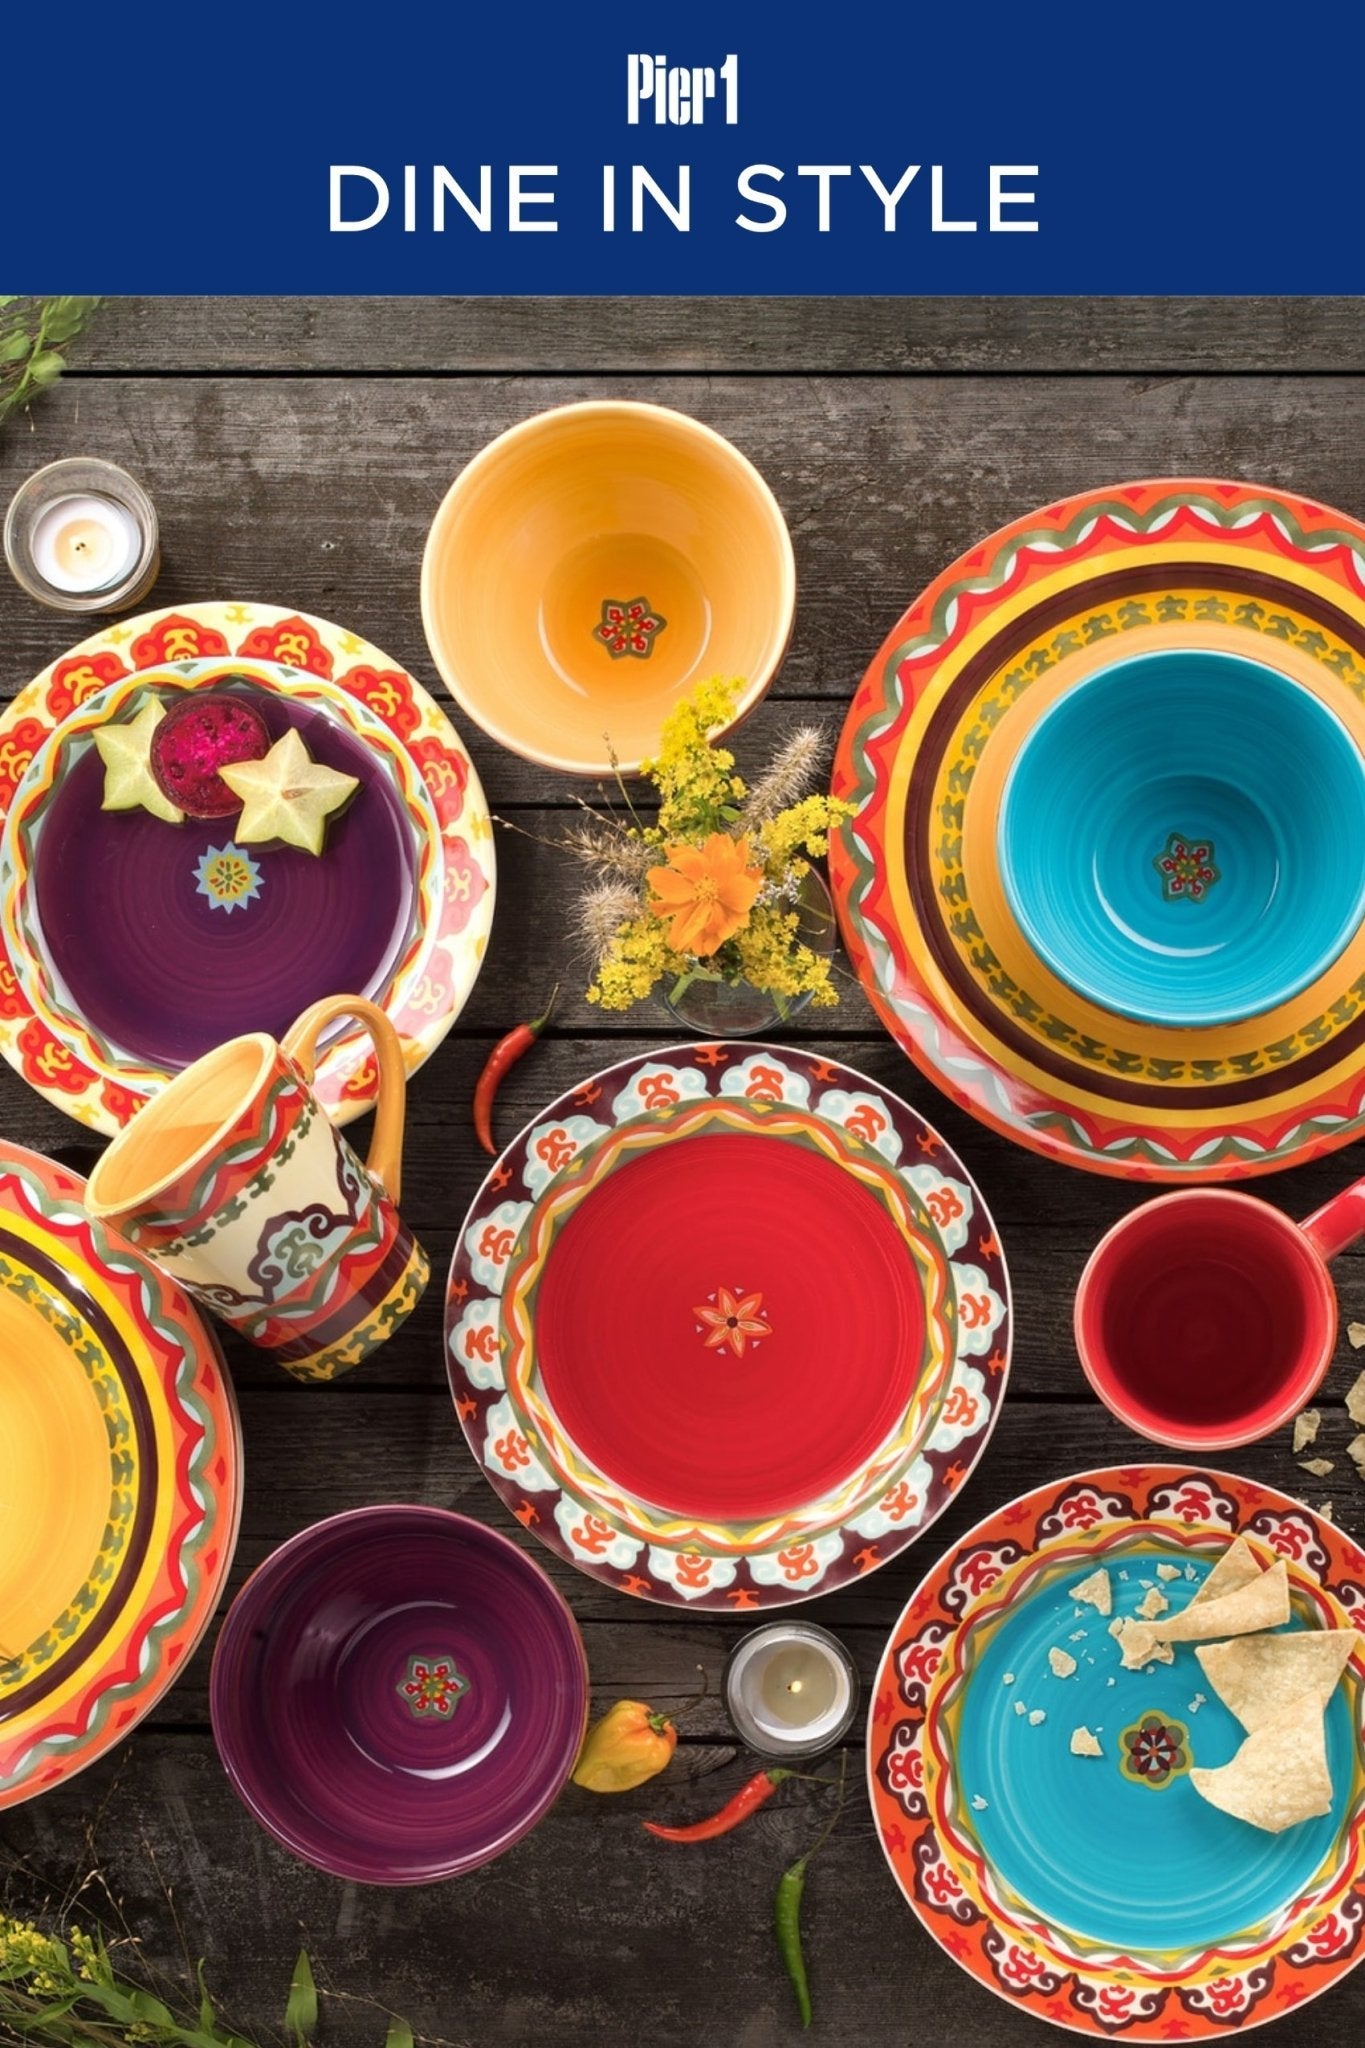 11 Ways to Add a Splash of Color to Your Home - Pier 1